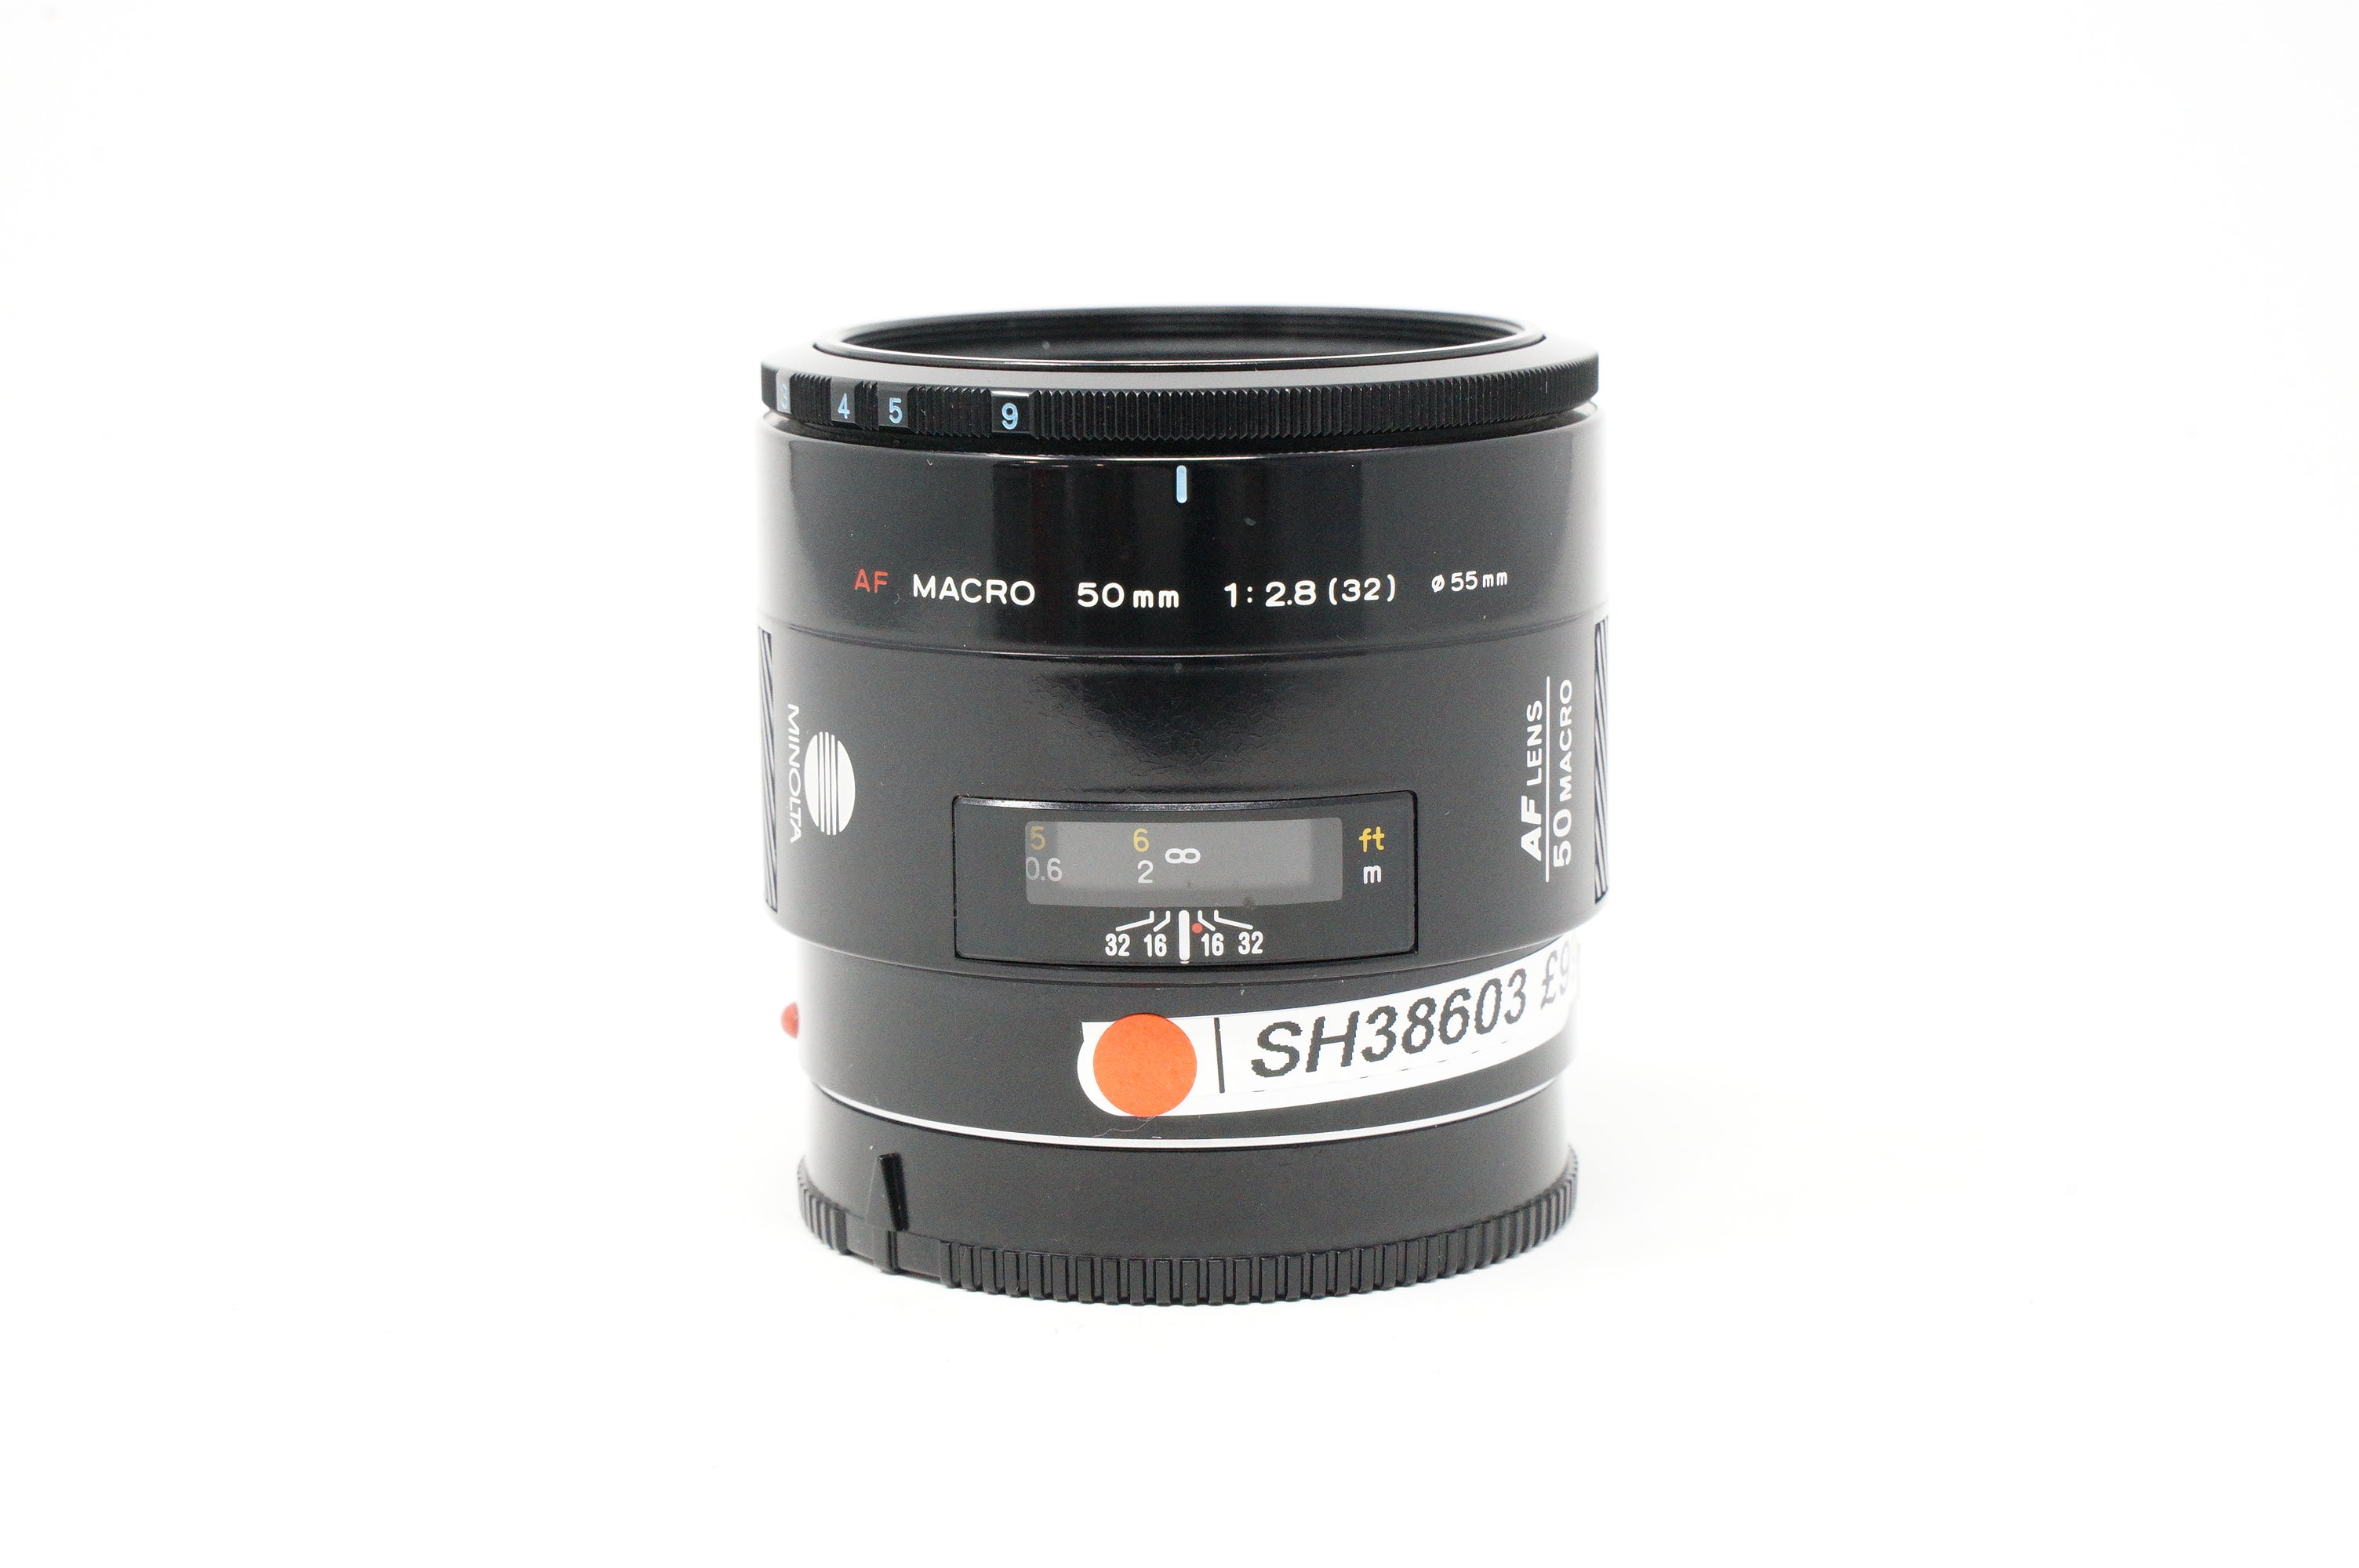 Product Image of Used Minolta AF 50mm F2.8 Macro lens for SONY A Mount (SH38603)